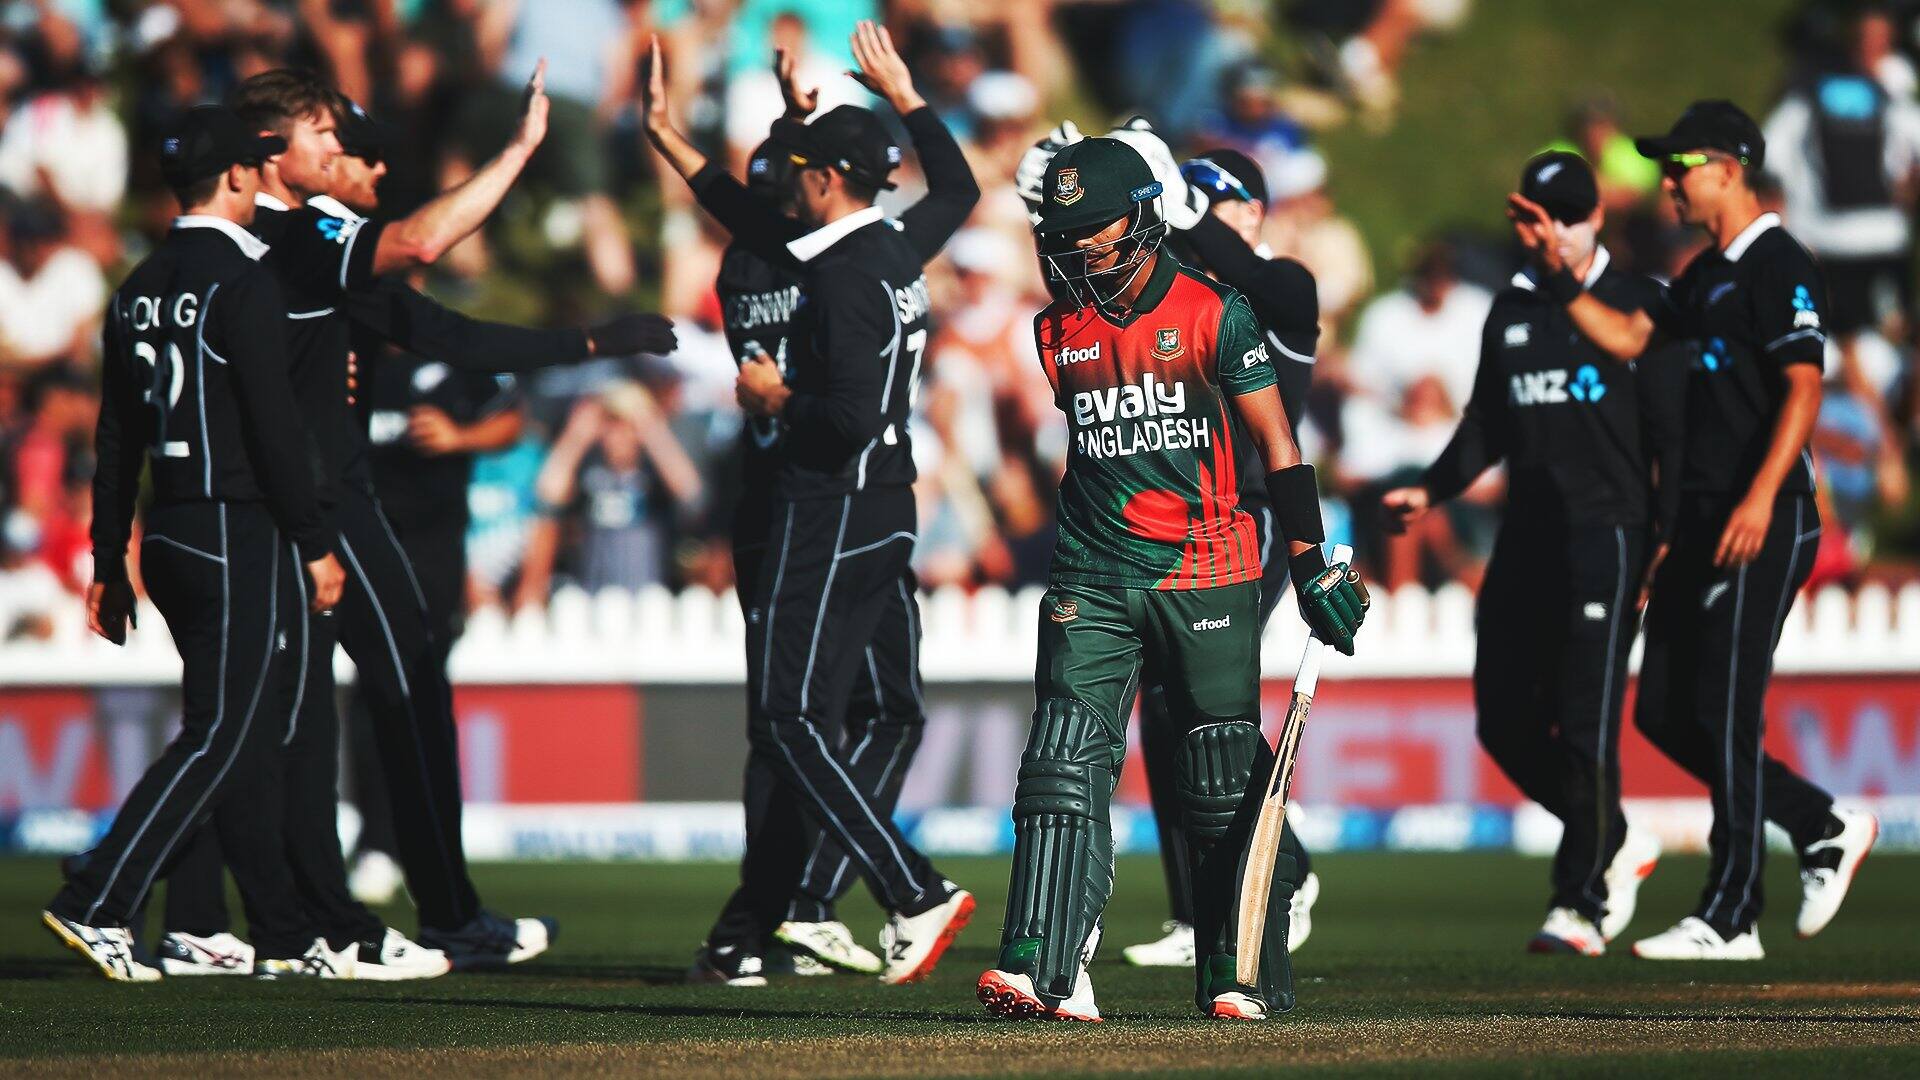 Bangladesh lose their last wicket for 154 with James Neesham completing his second five-wicket haul in ODIs. (Source: Twitter)